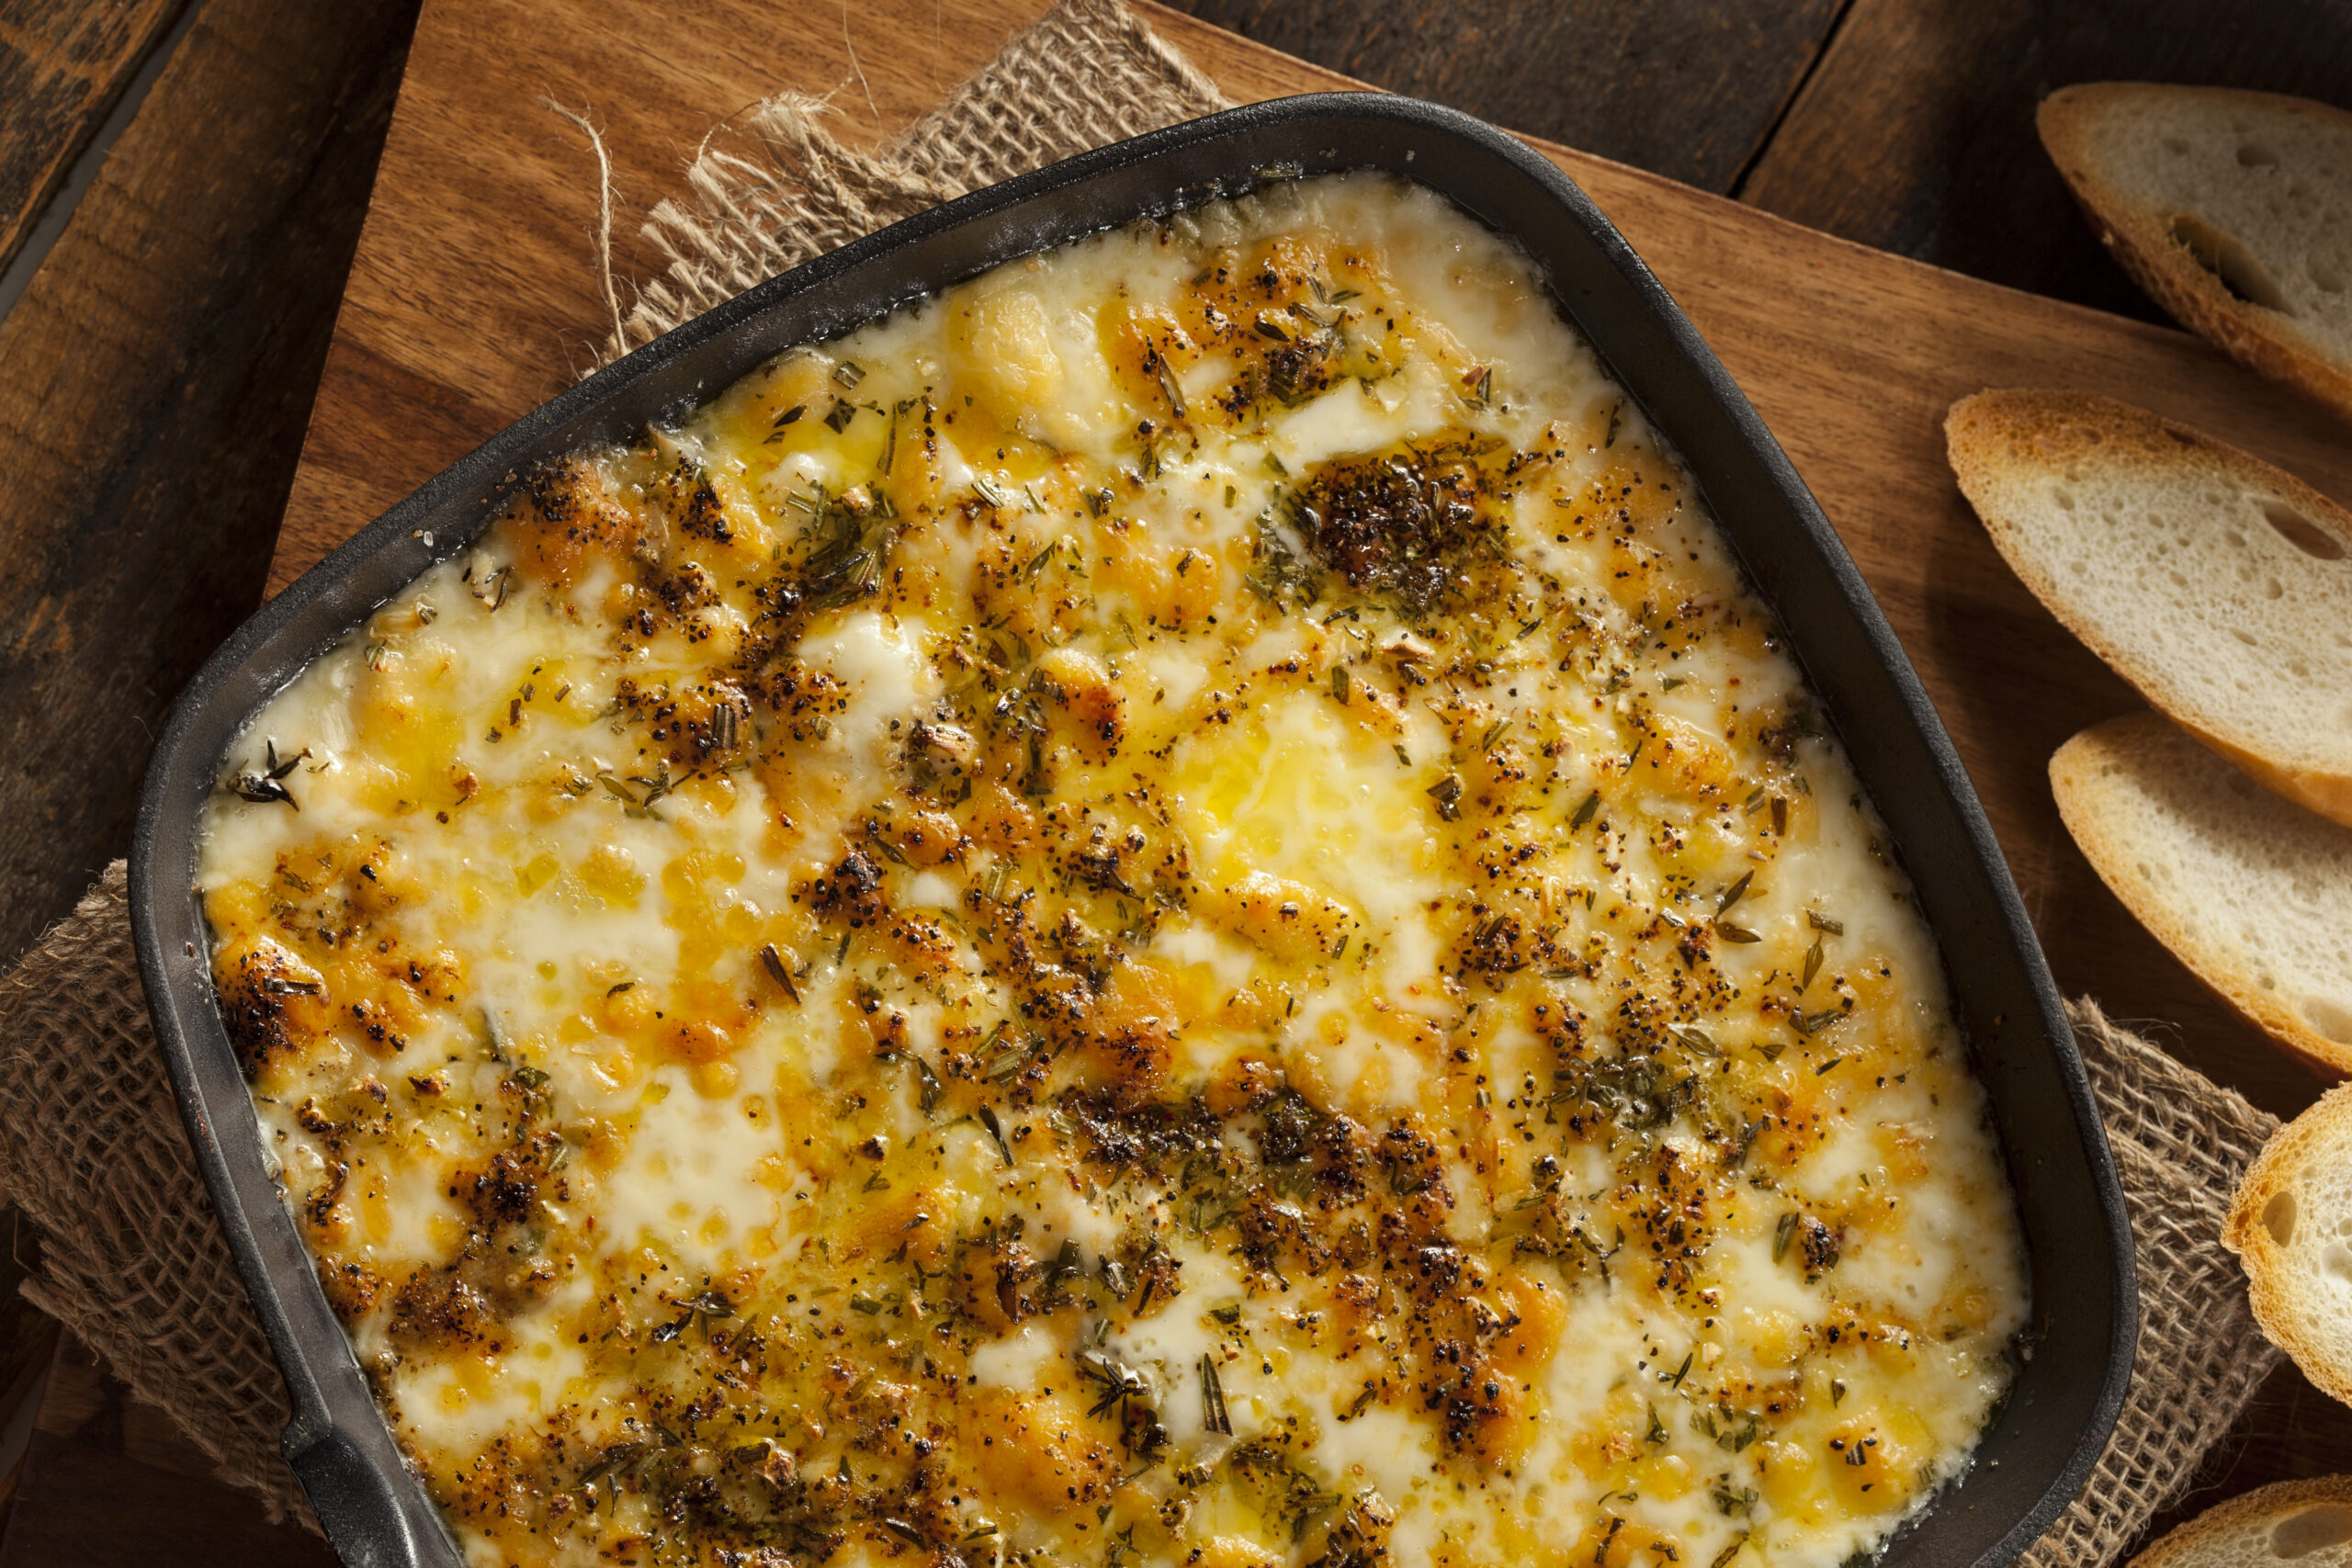 Baked Fontina Cheese Dip - an unforgettable Italian inspired appetizer recipe. Perfectly melted Fontina cheese, seasoned with aromatic herbs, served hot and delicious. Party-perfect, easy to make, and irresistibly creamy!